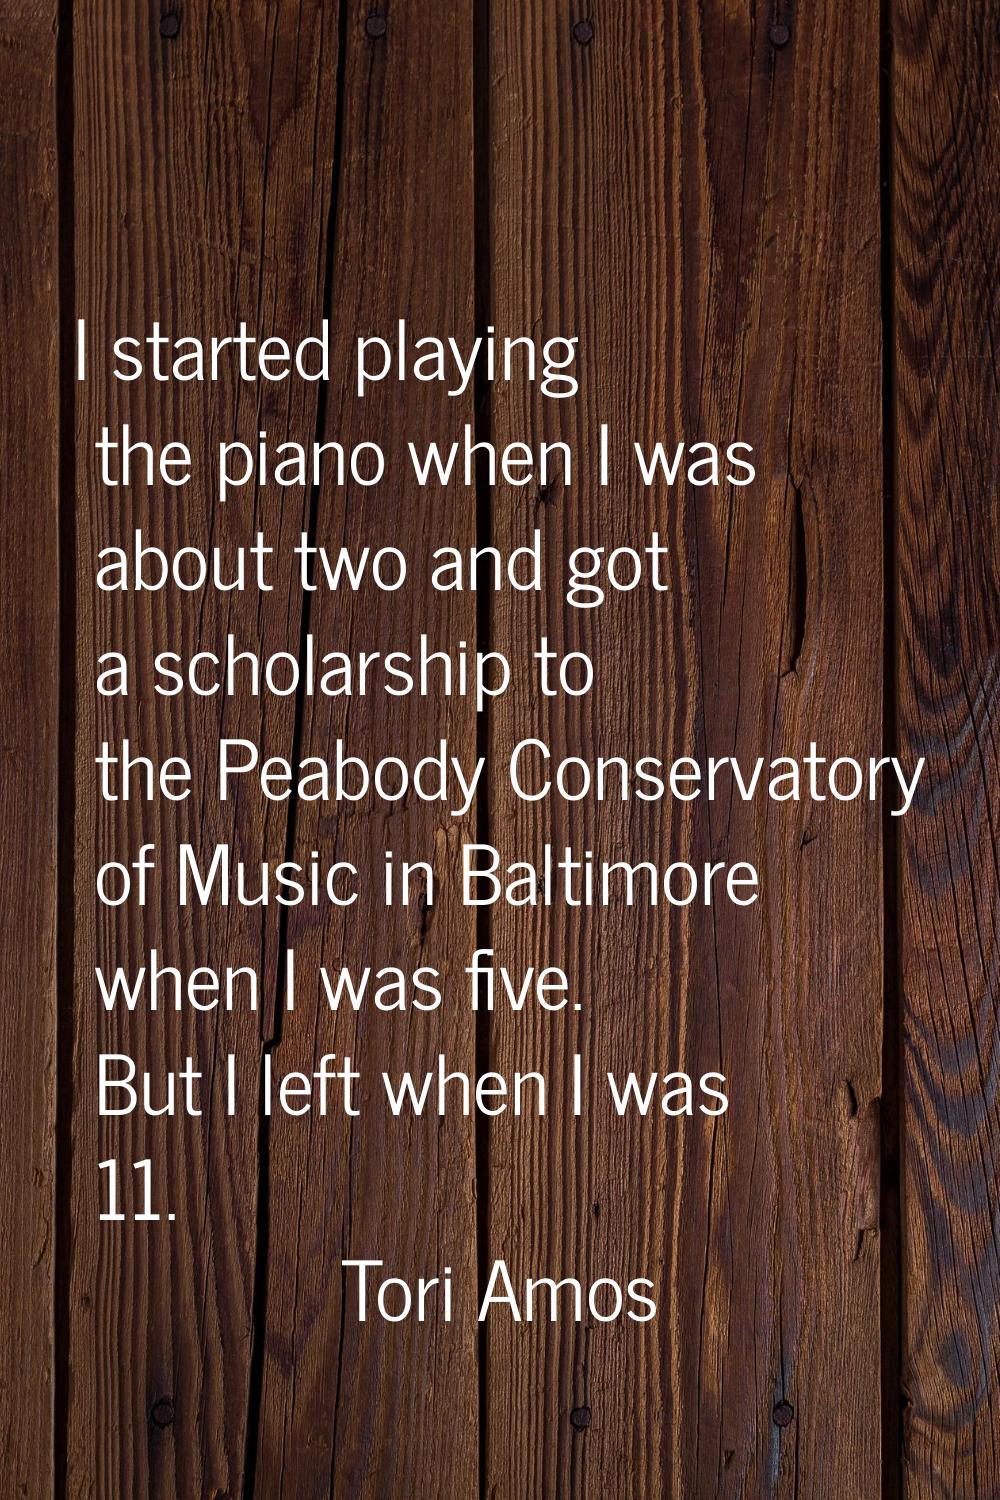 I started playing the piano when I was about two and got a scholarship to the Peabody Conservatory 